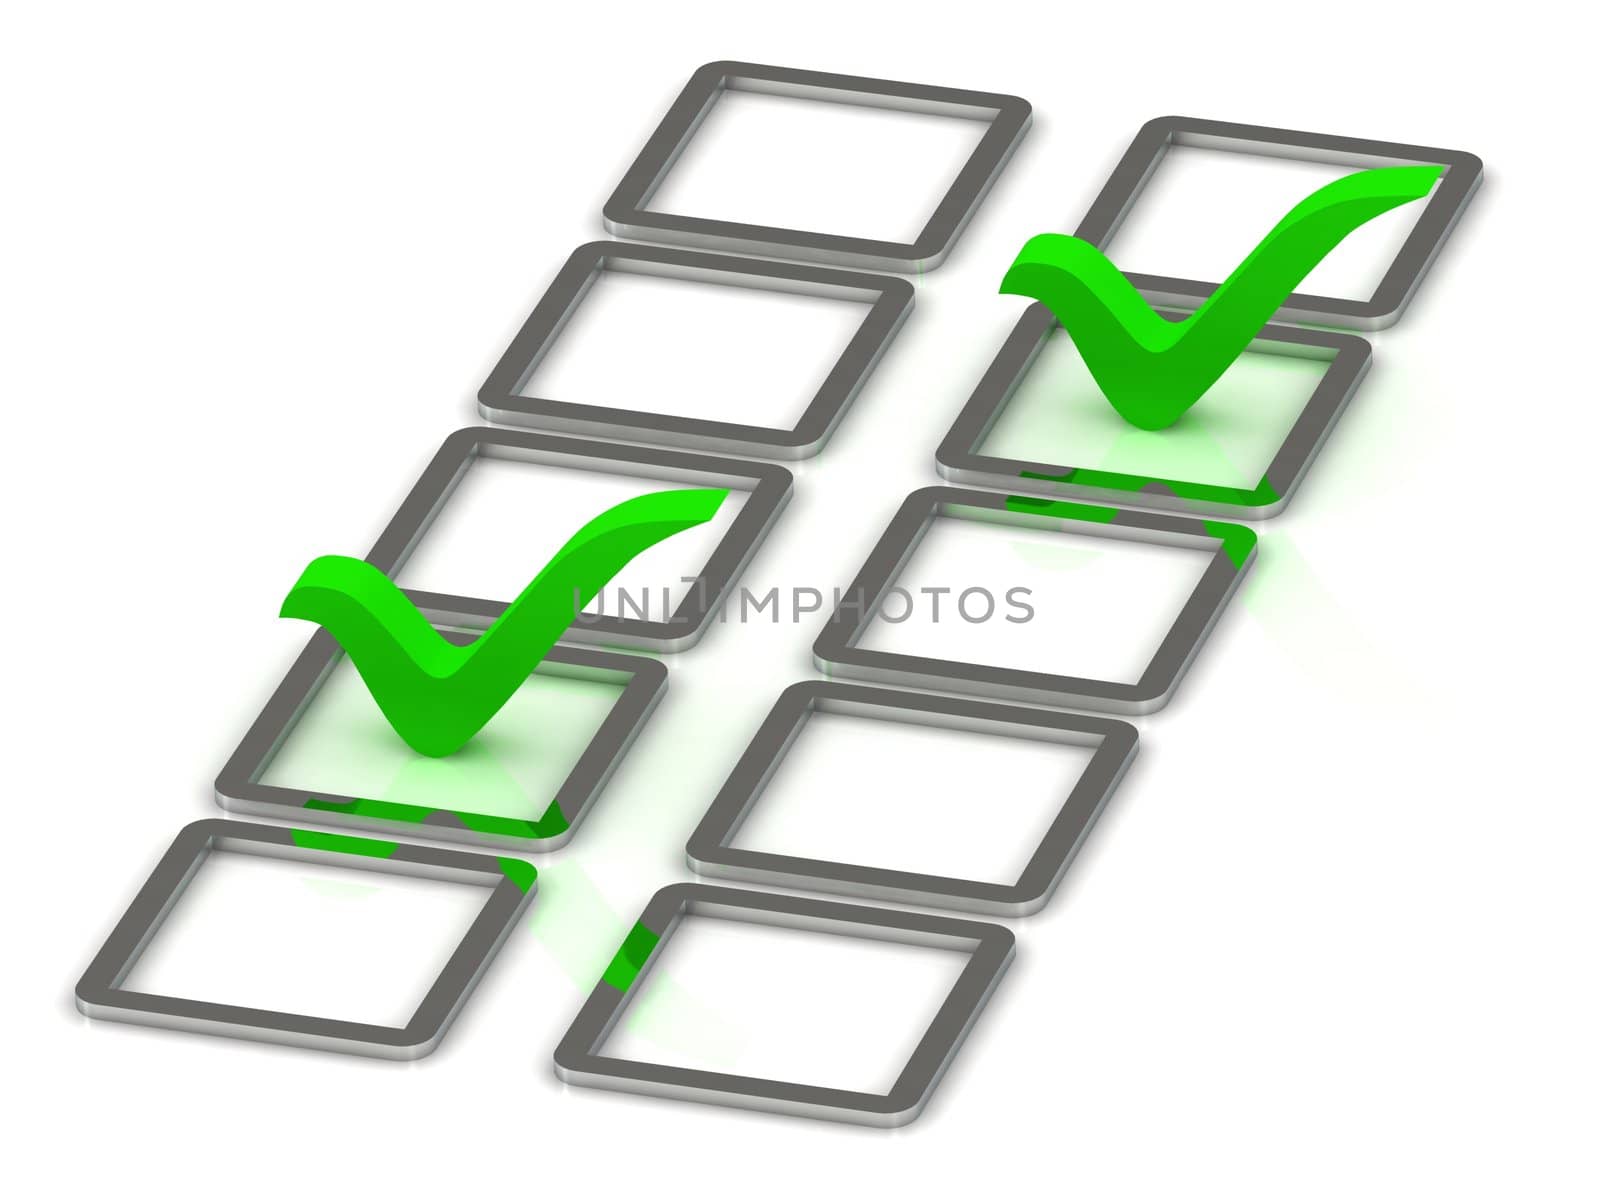 3d illustration of 2 green check mark in silver box over white background